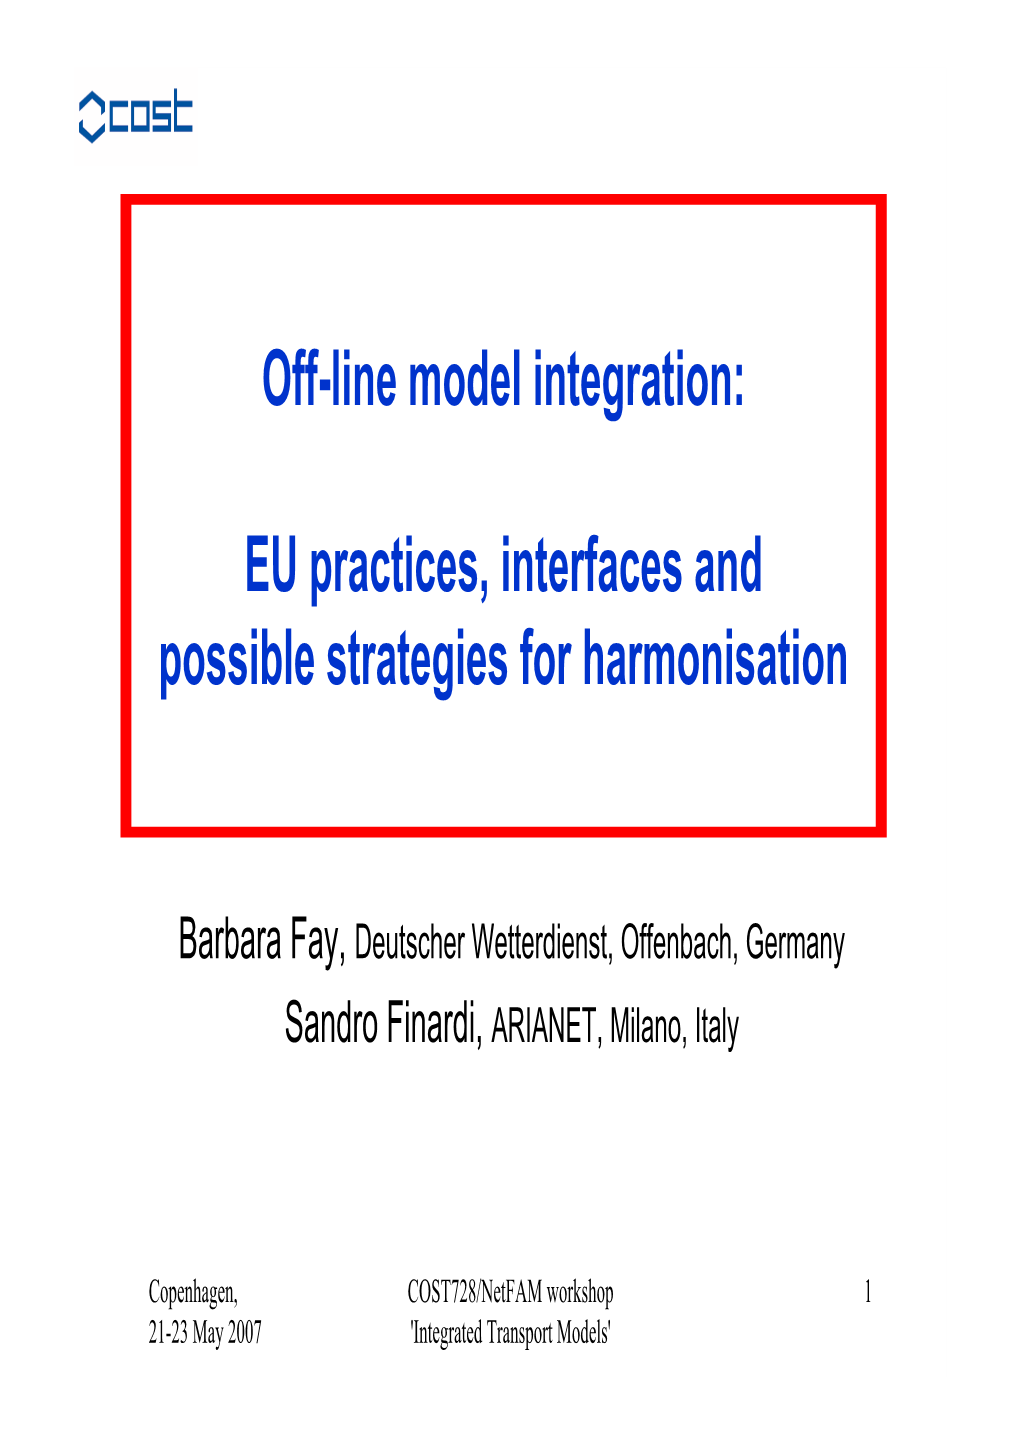 EU Practices, Interfaces and Possible Strategies for Harmonisation